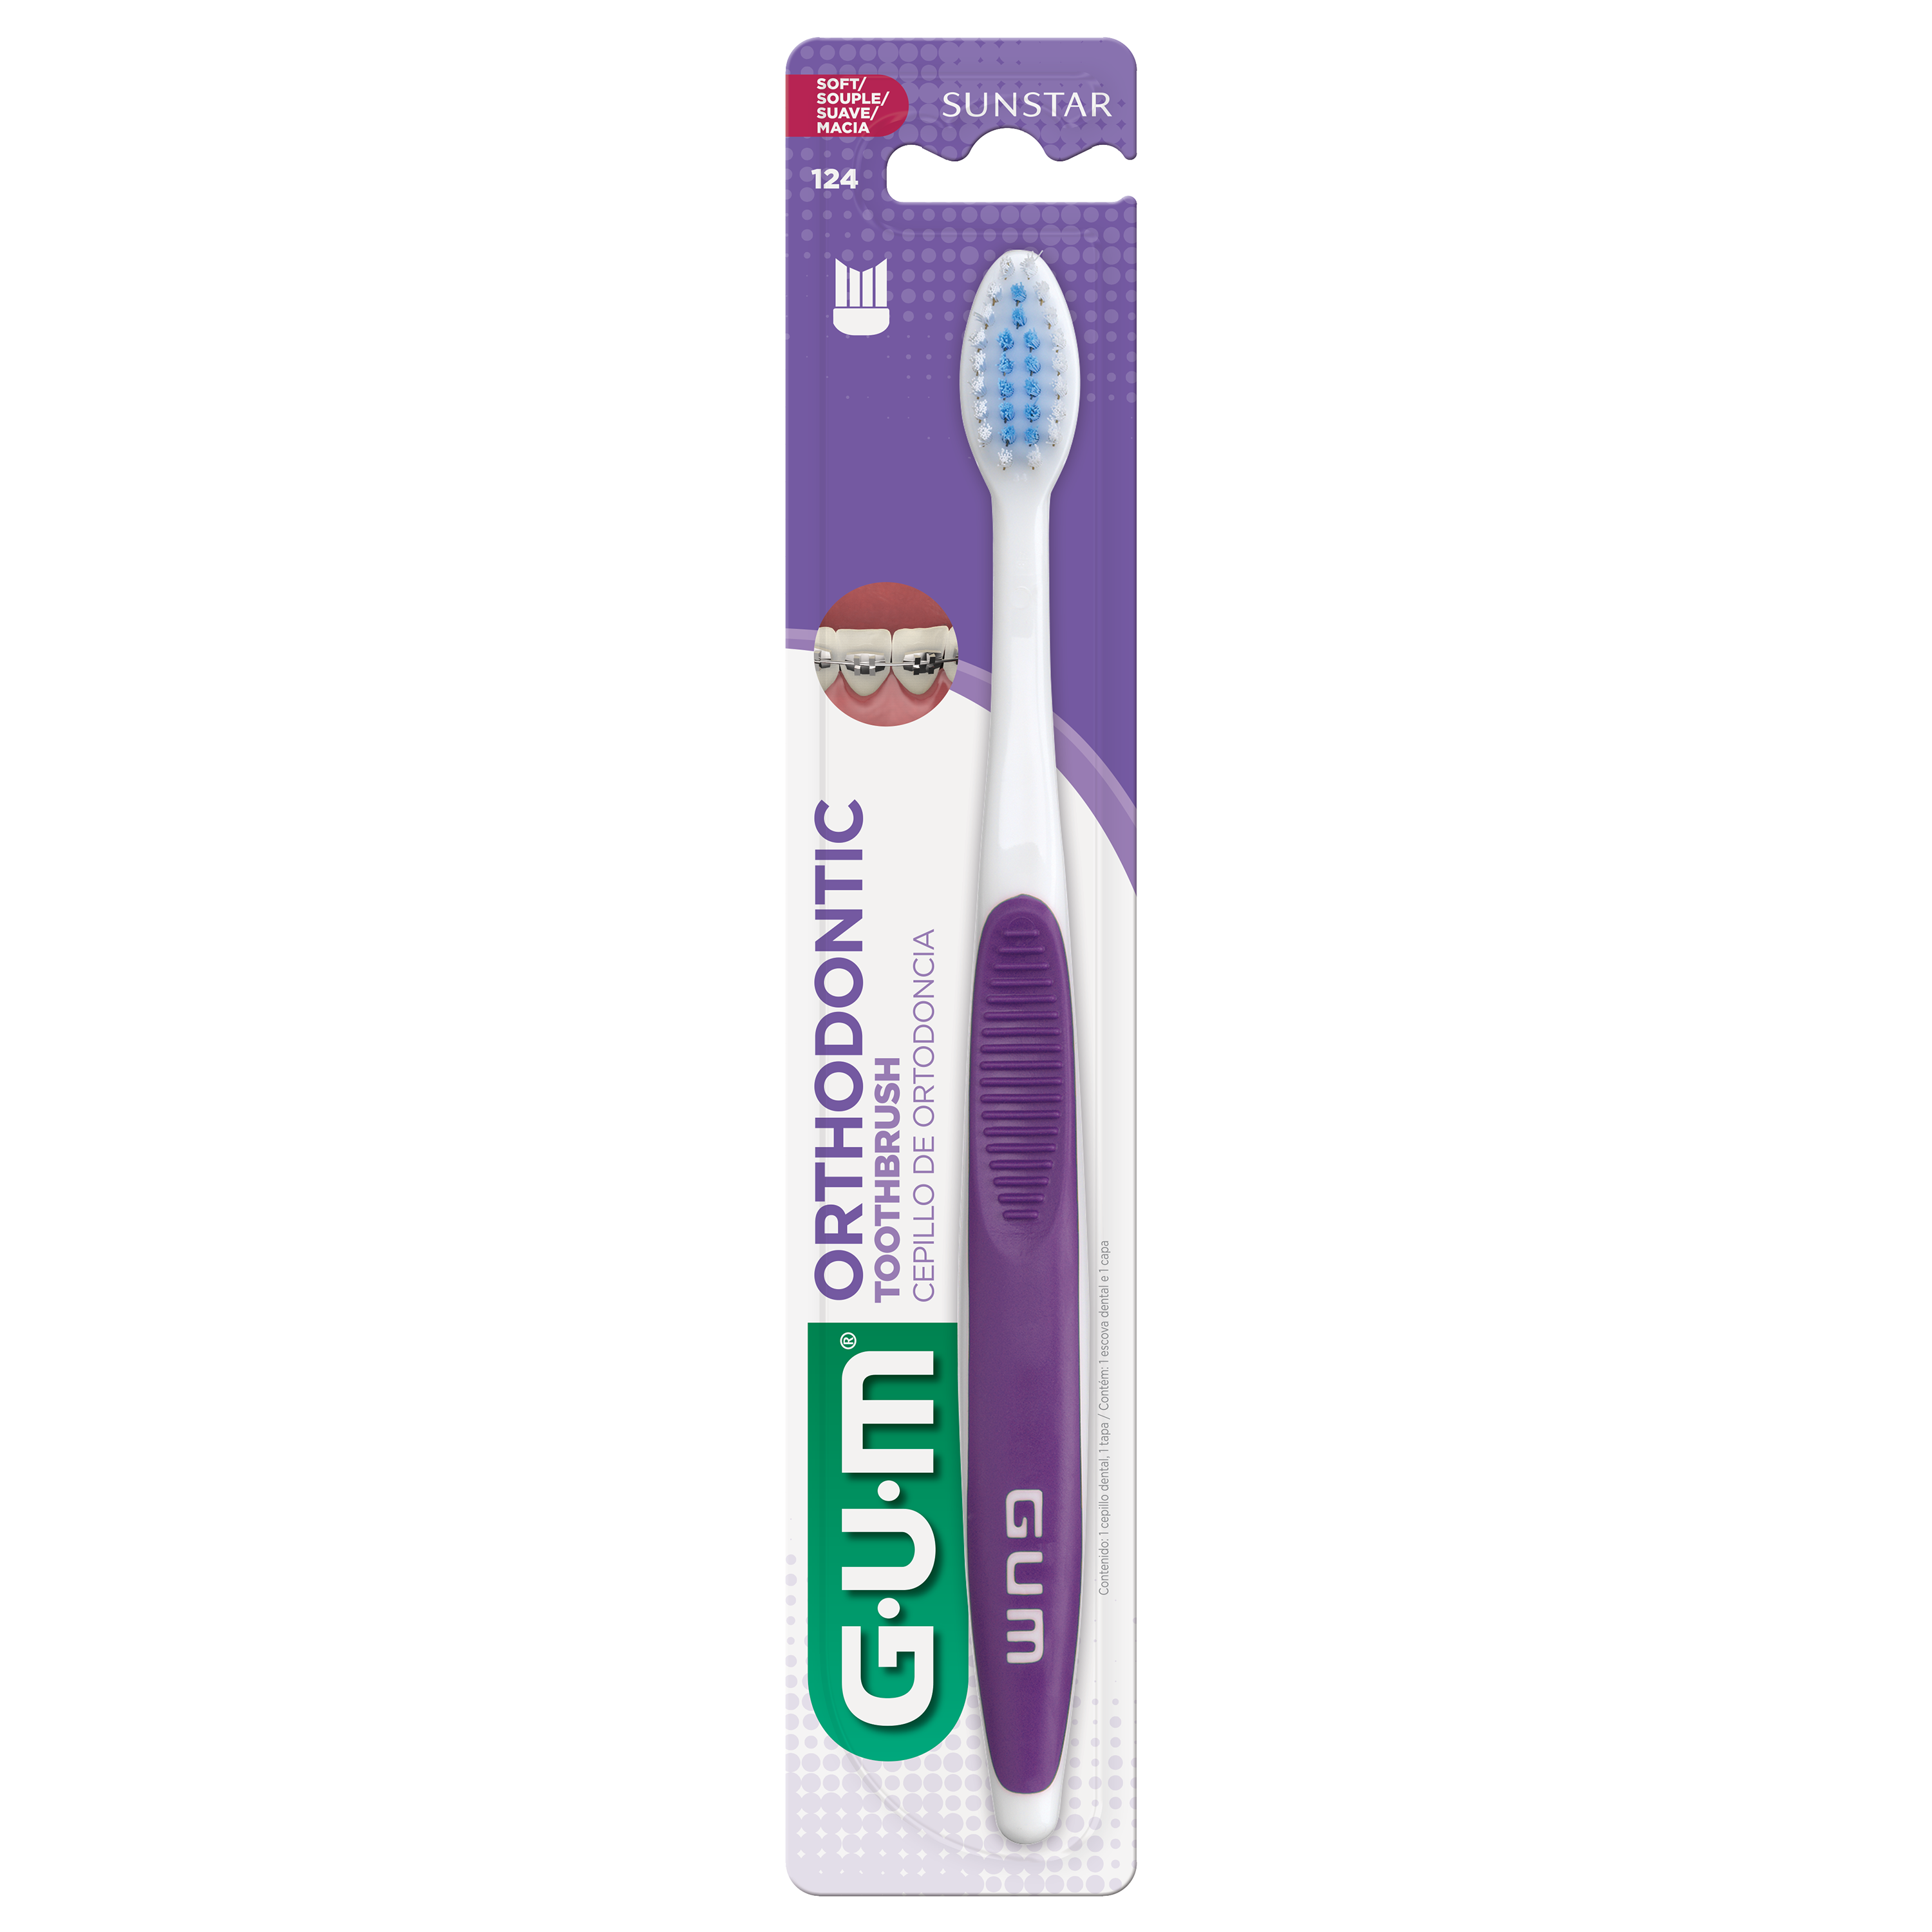 124LY-124MX-124PD-Product-Packaging-Toothbrush-Ortho-front-Purple-1ct.png